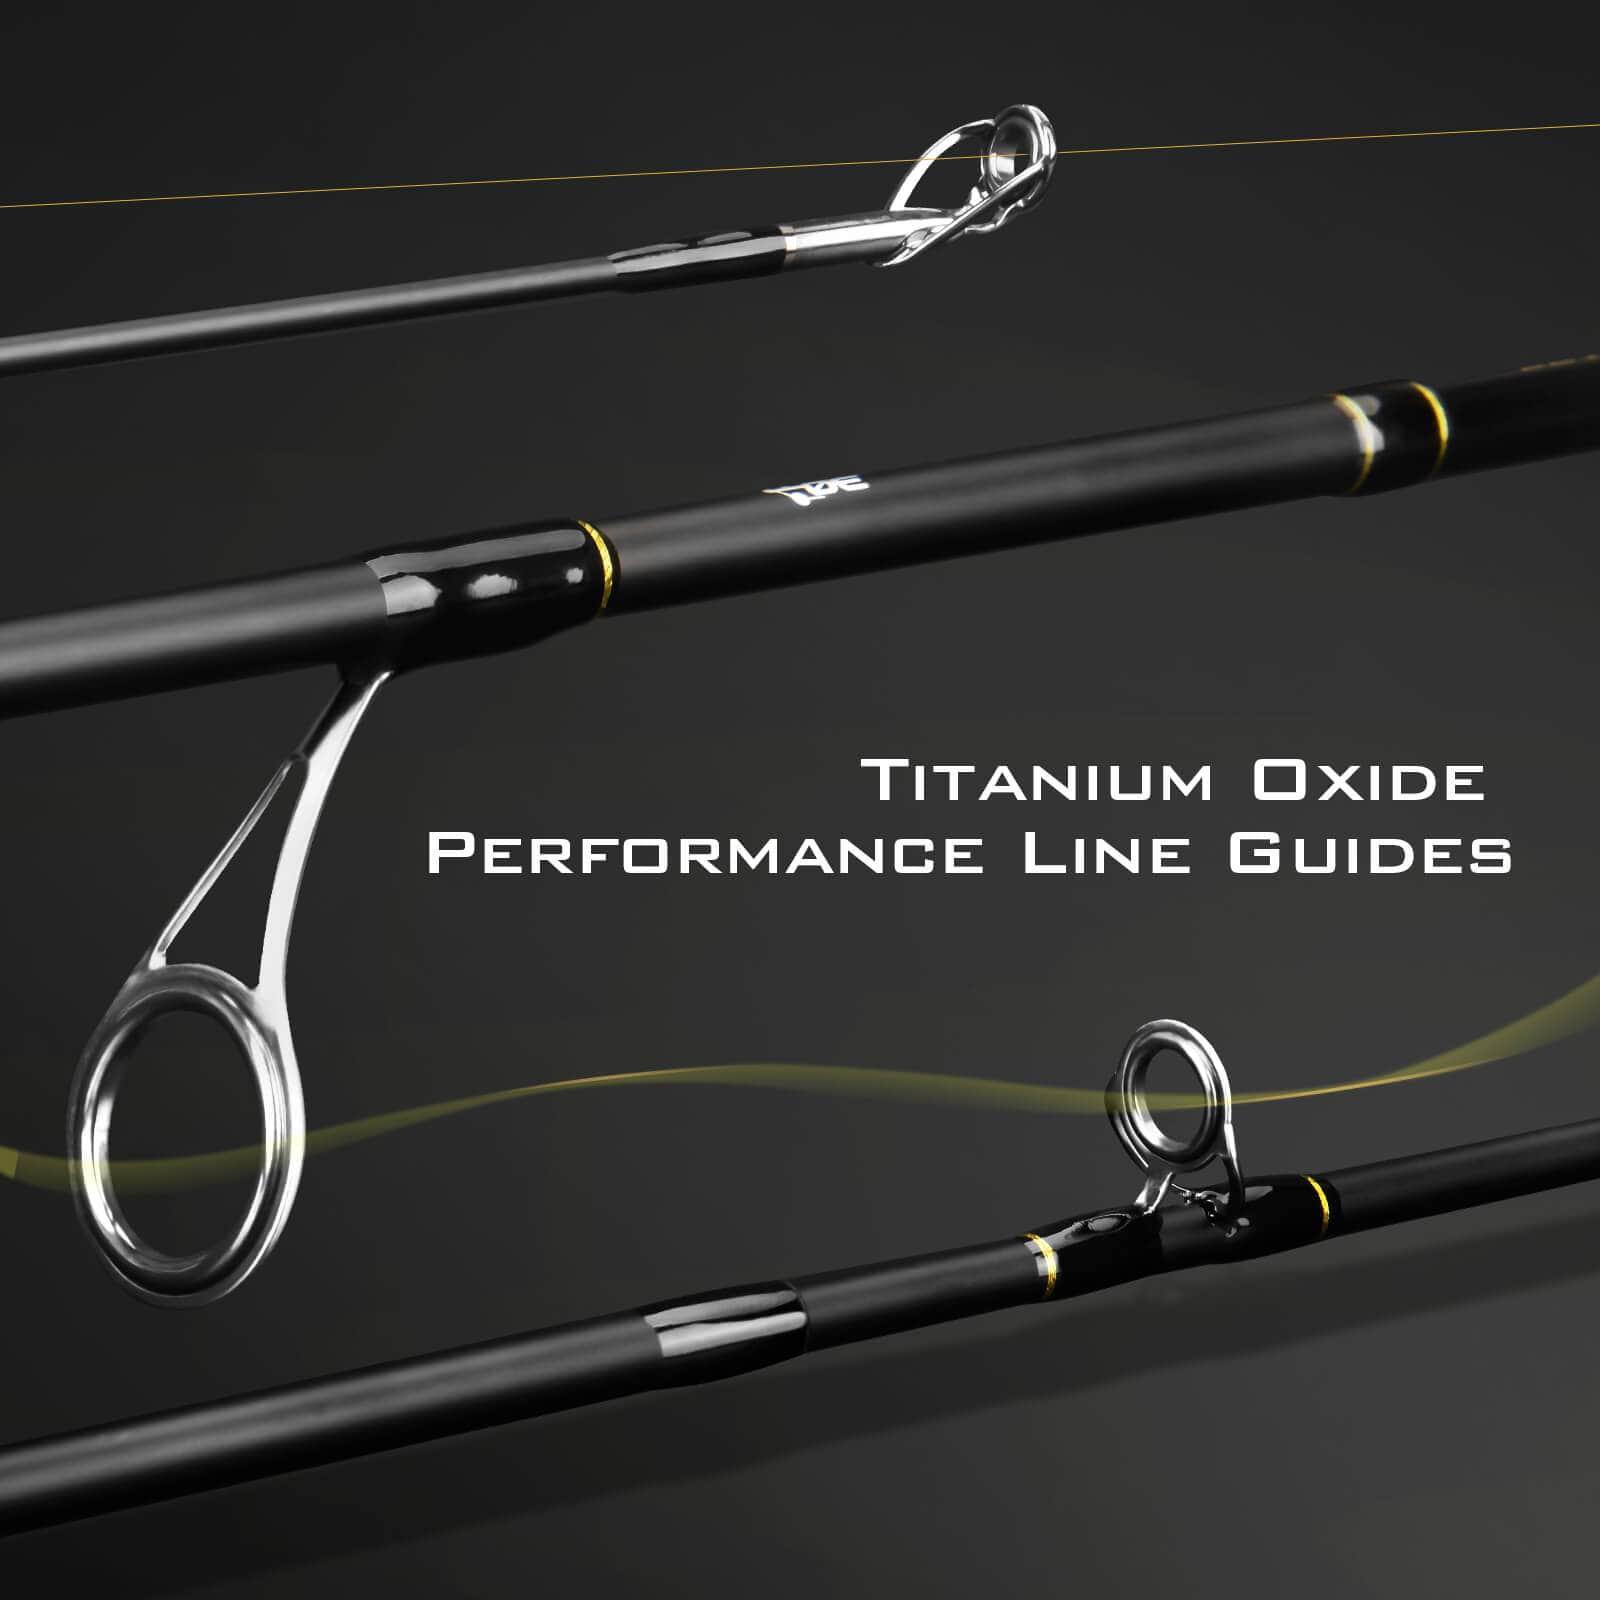 KastKing Resolute Fishing Rods, Spinning Rods & India